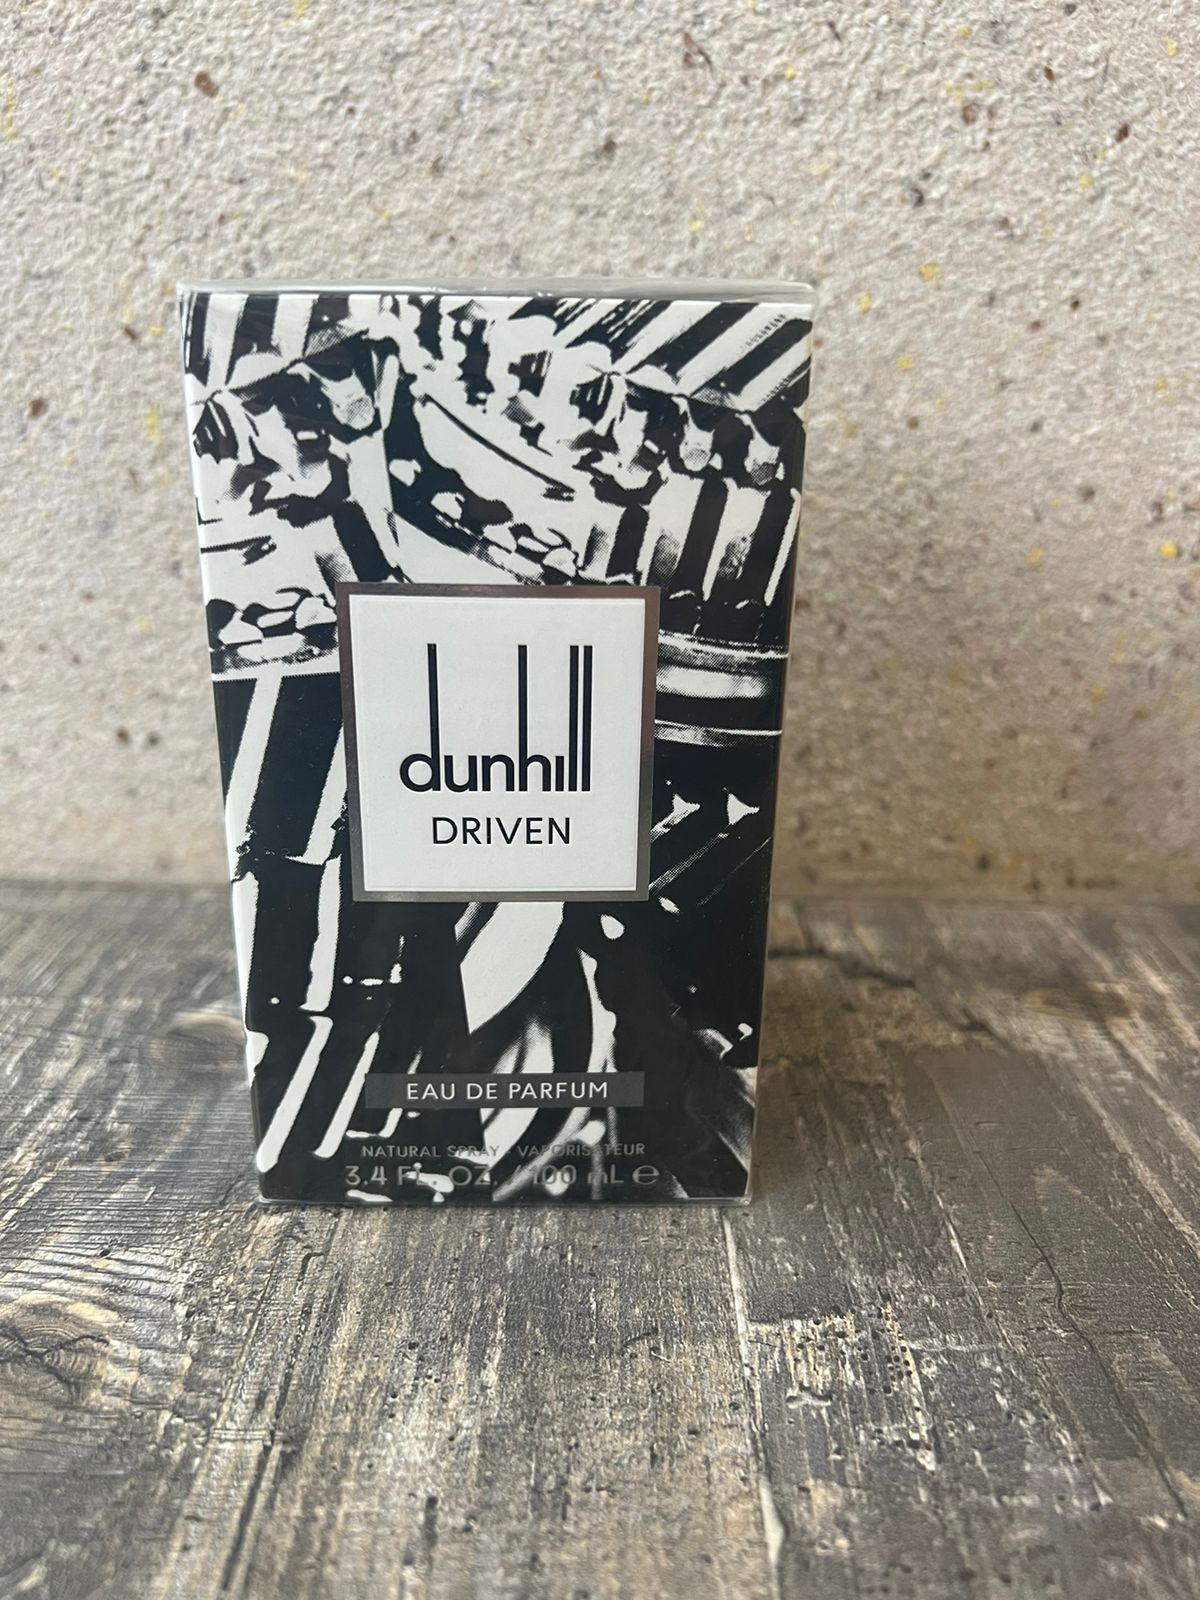 Парфюм Dunhill driven